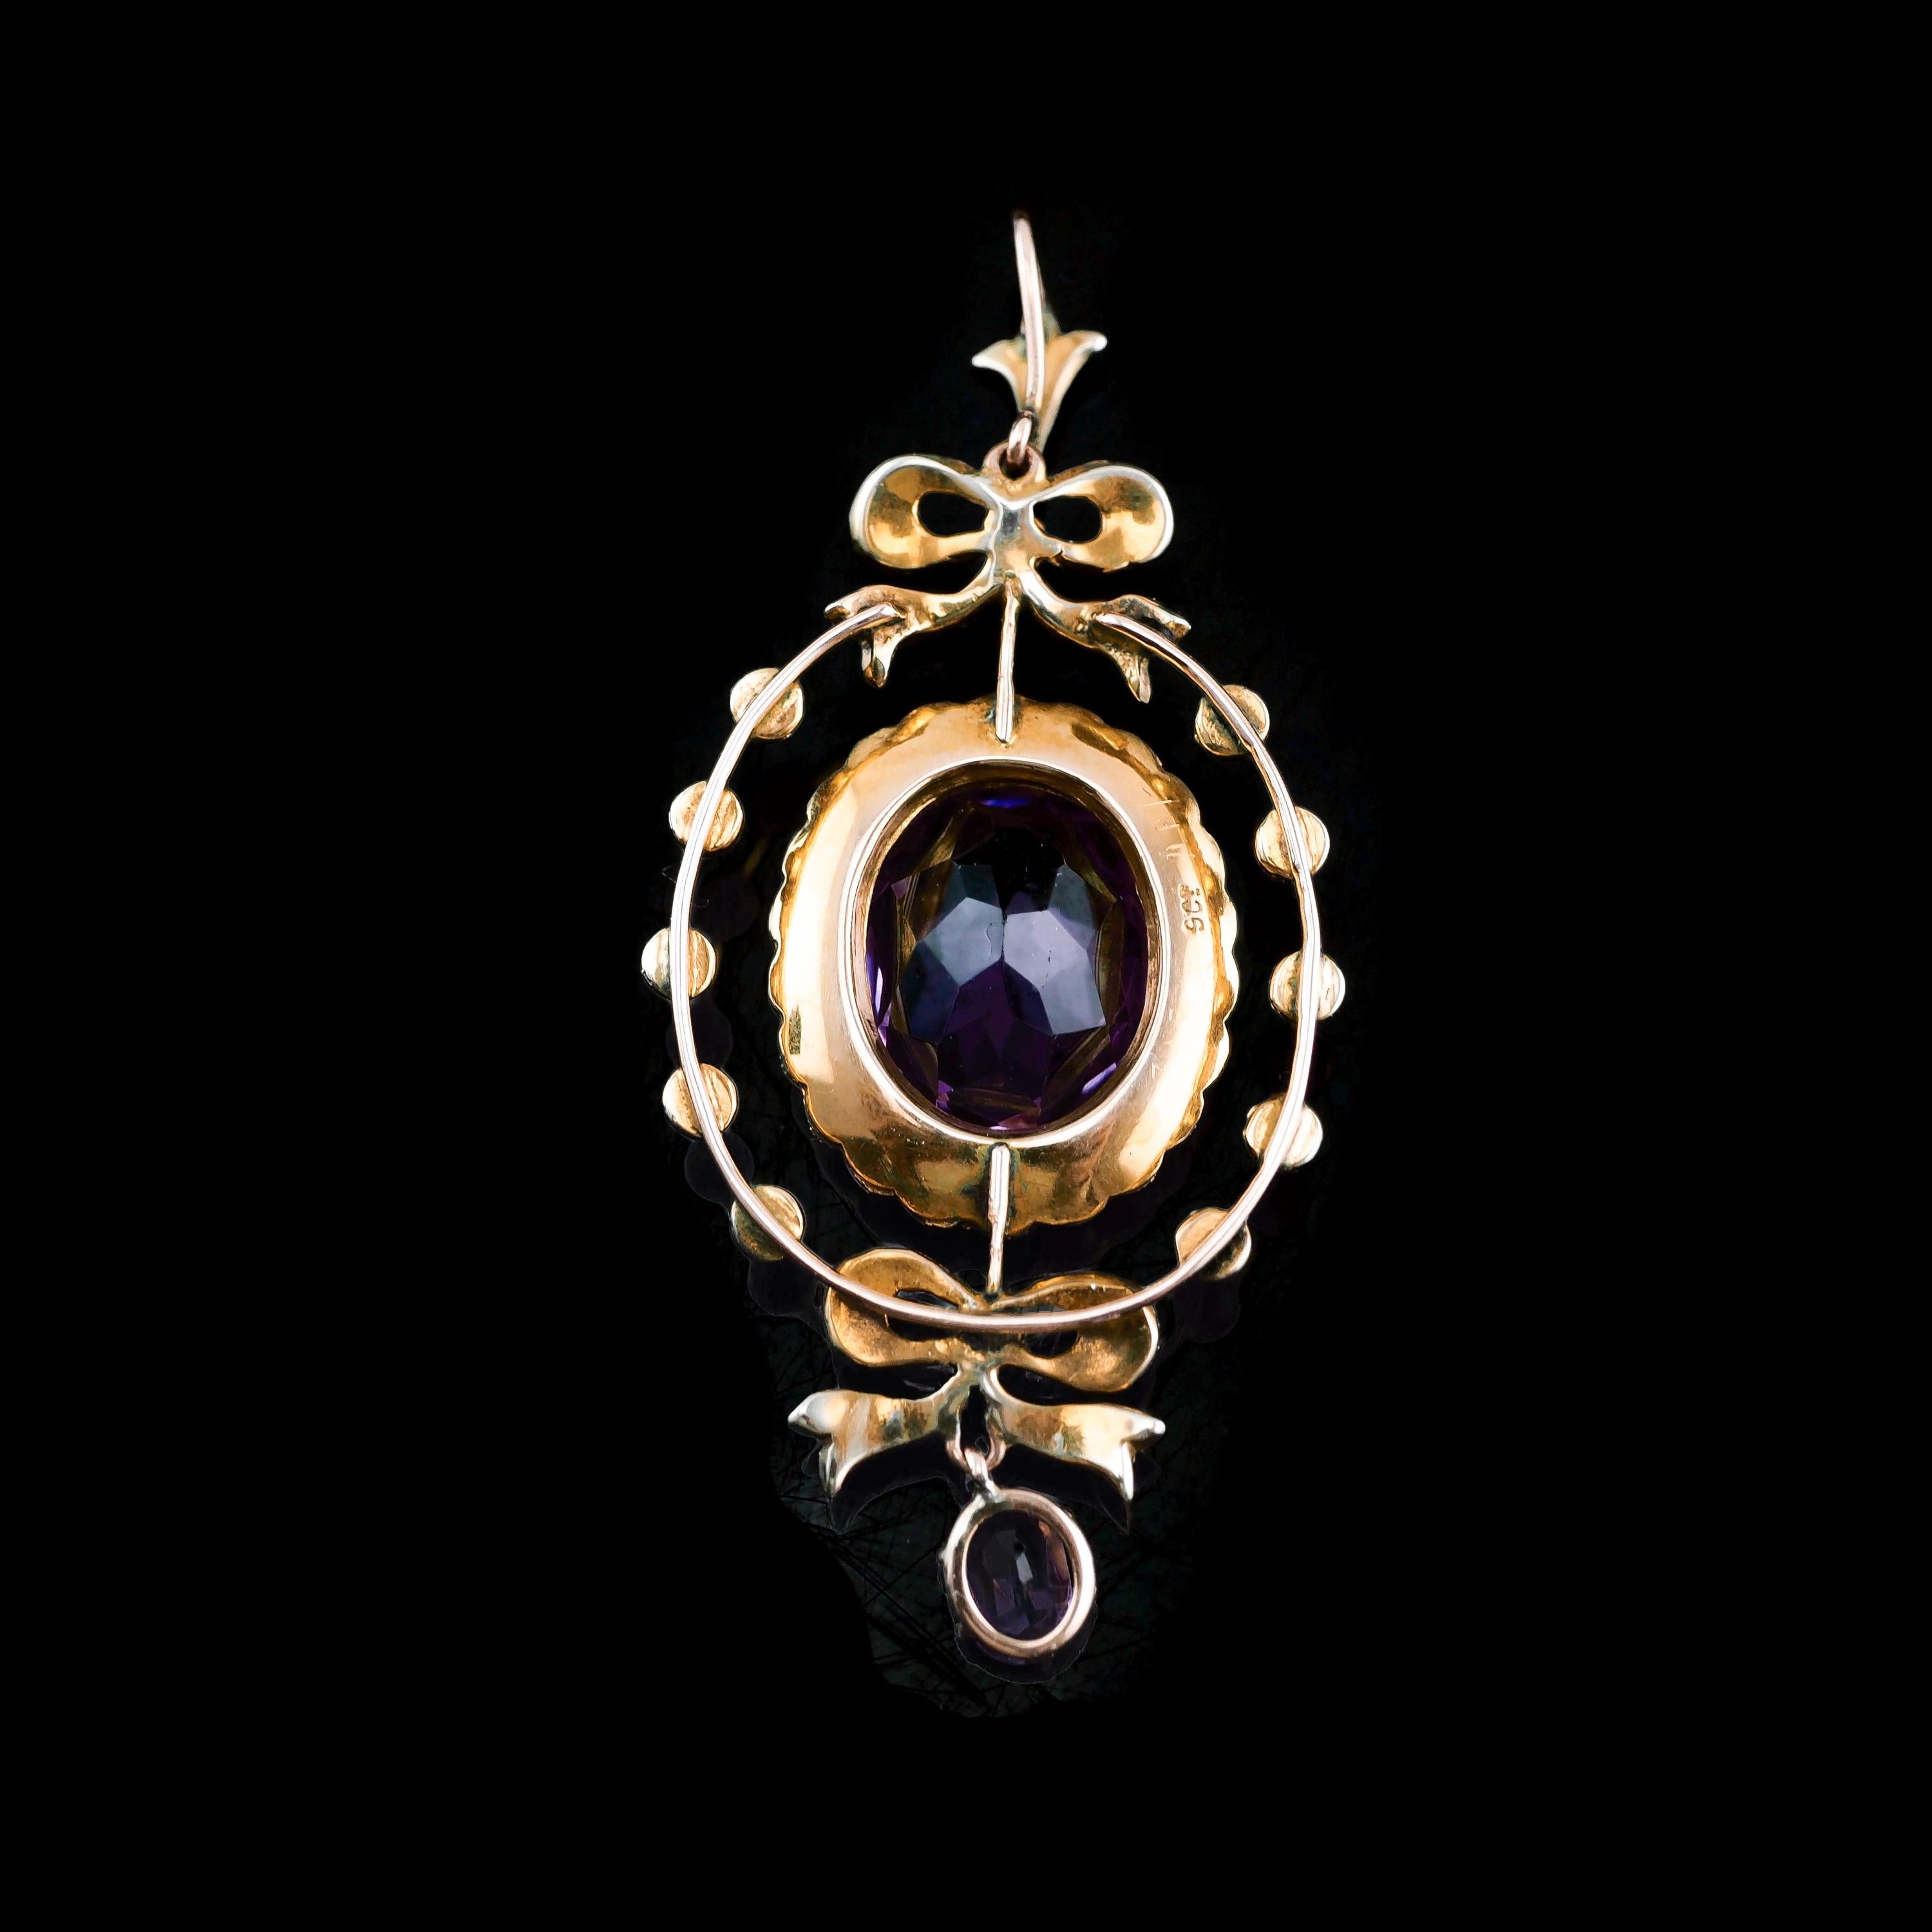 Antique Edwardian Amethyst & Seed Pearl 9k Gold Necklace Pendant, circa 1905 11